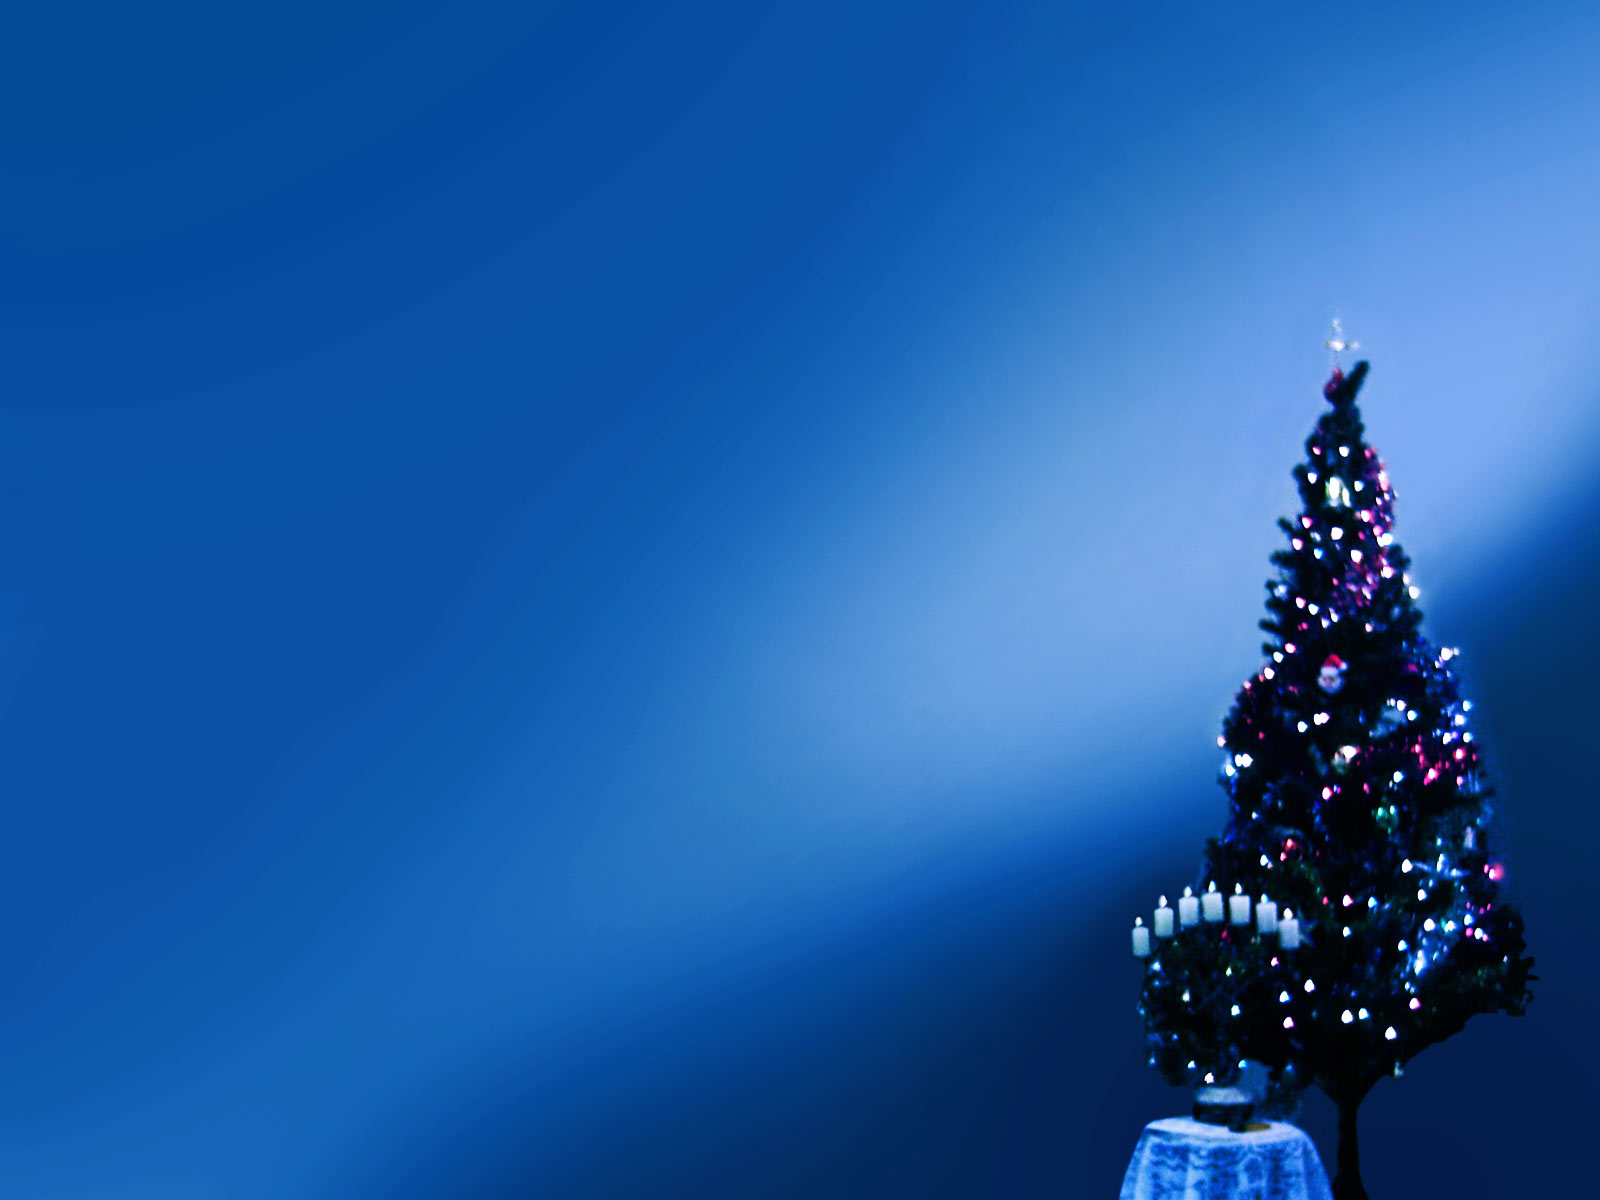 2015 free Christmas backgrounds for photoshop - wallpapers, images ...